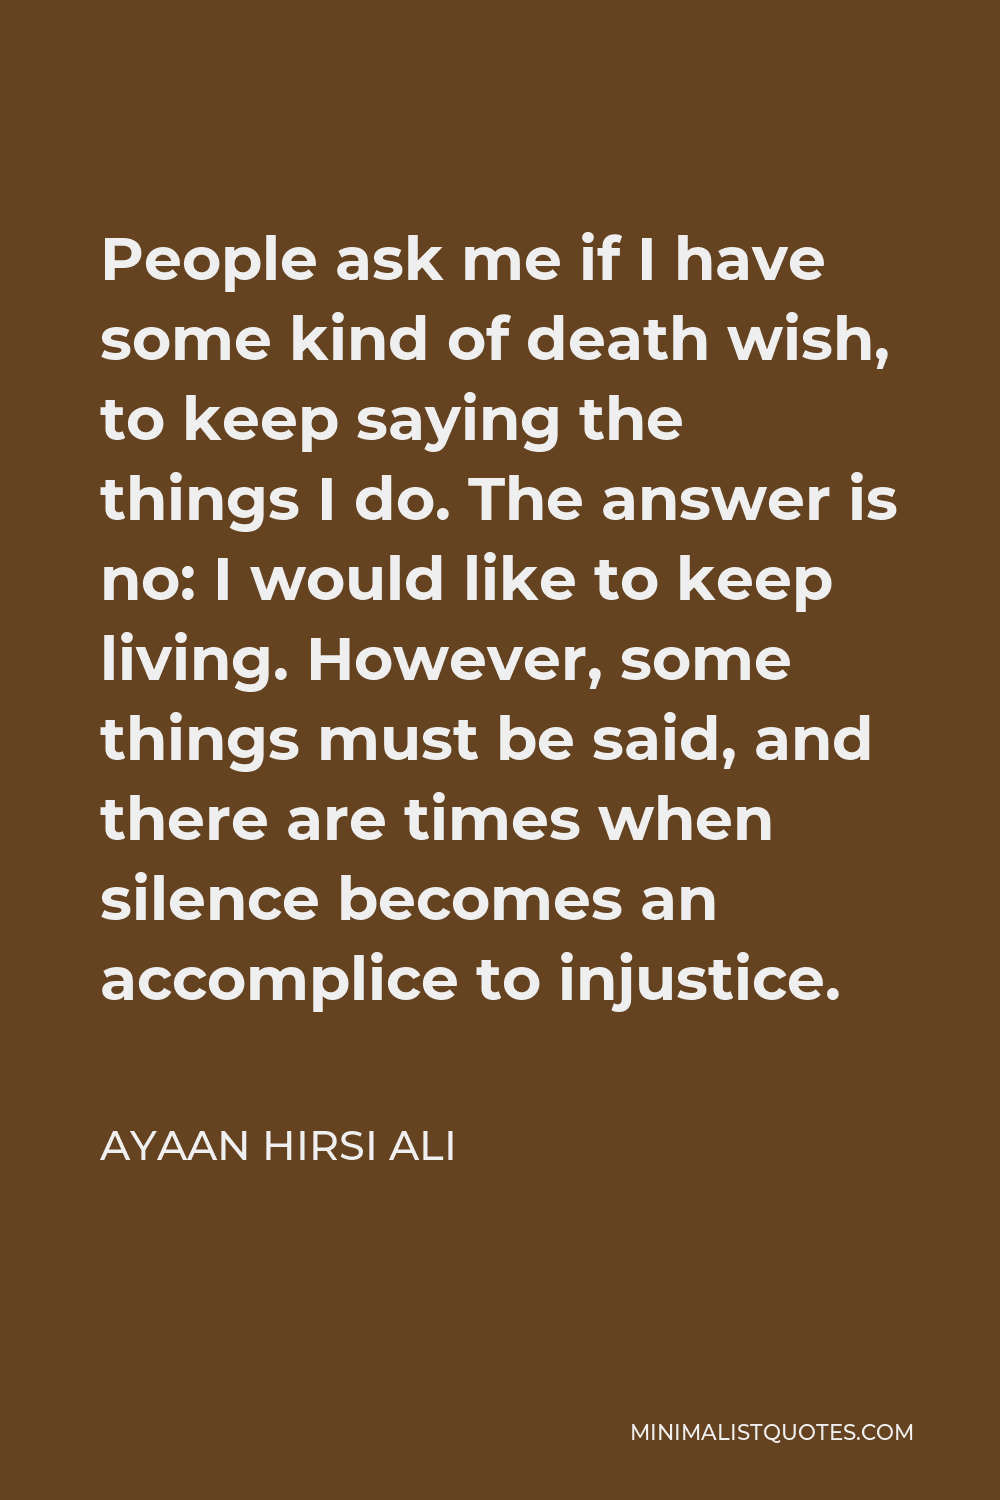 Ayaan Hirsi Ali Quote - People ask me if I have some kind of death wish, to keep saying the things I do. The answer is no: I would like to keep living. However, some things must be said, and there are times when silence becomes an accomplice to injustice.